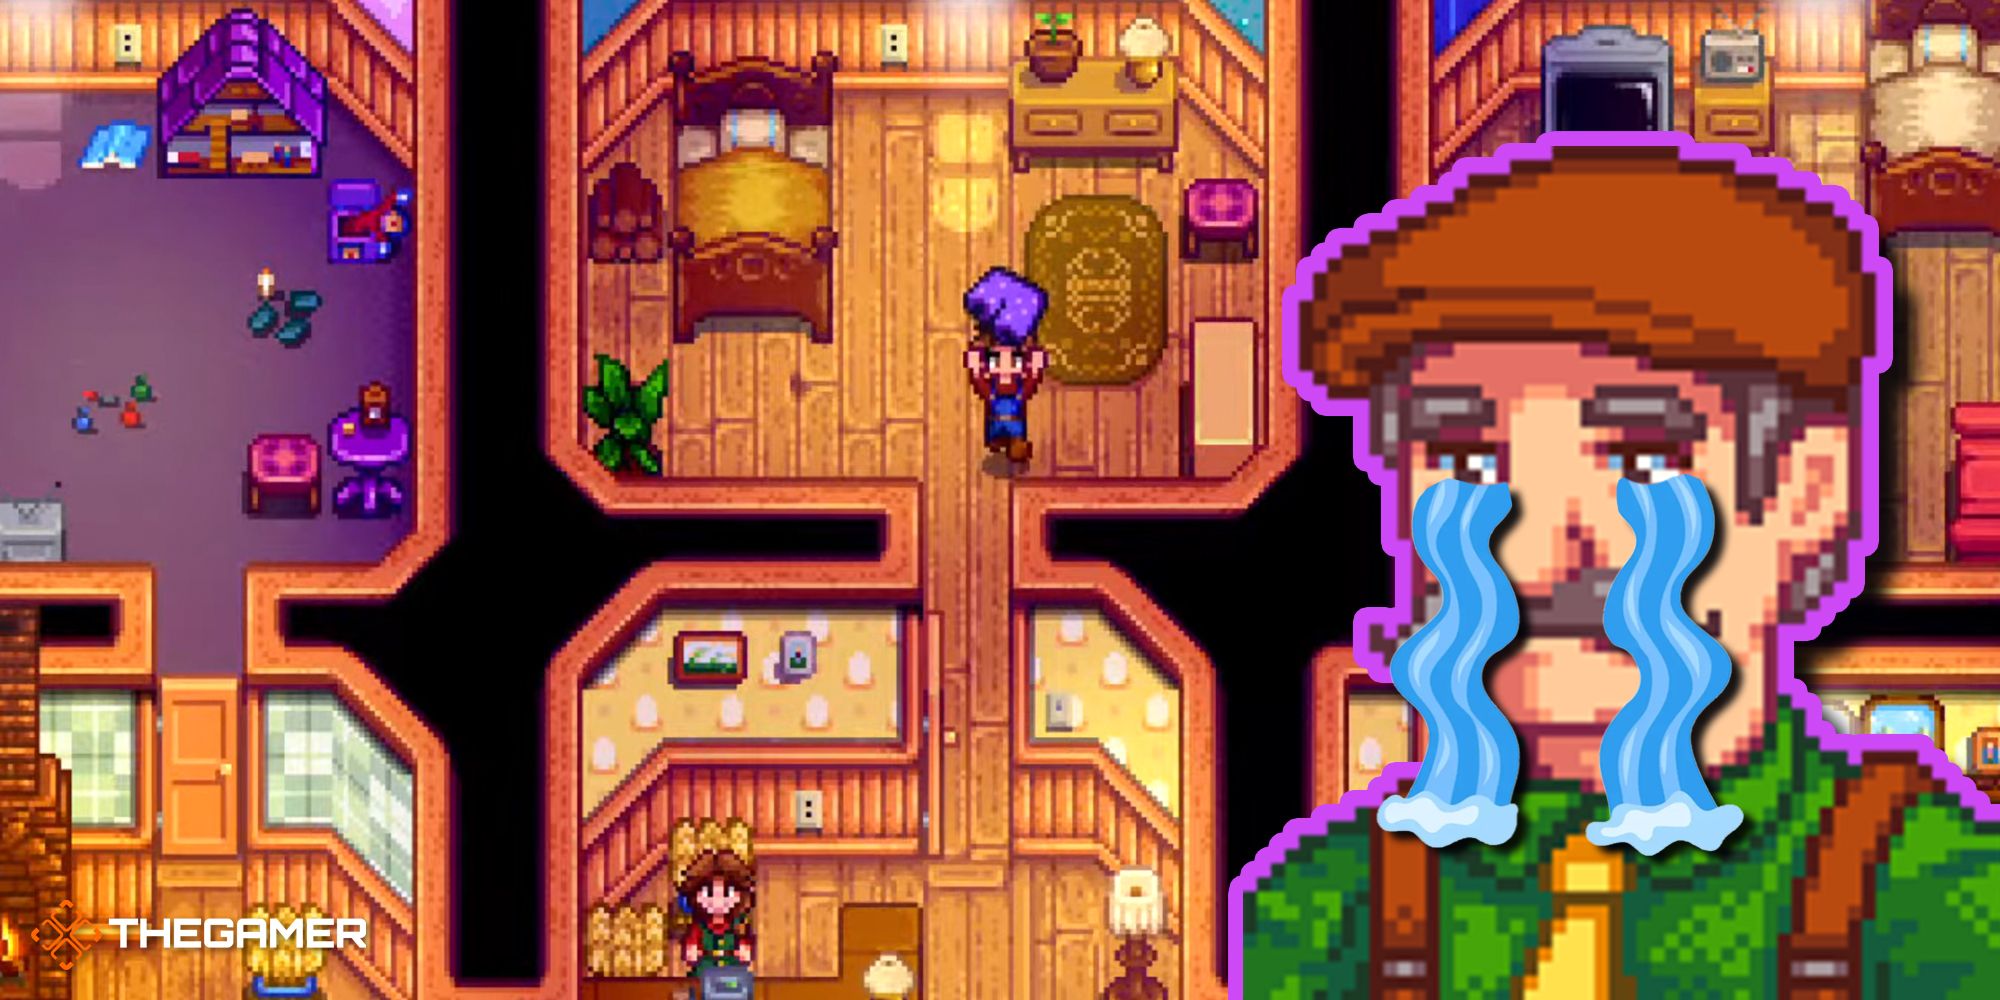 Where To Find The Purple Shorts In Stardew Valley